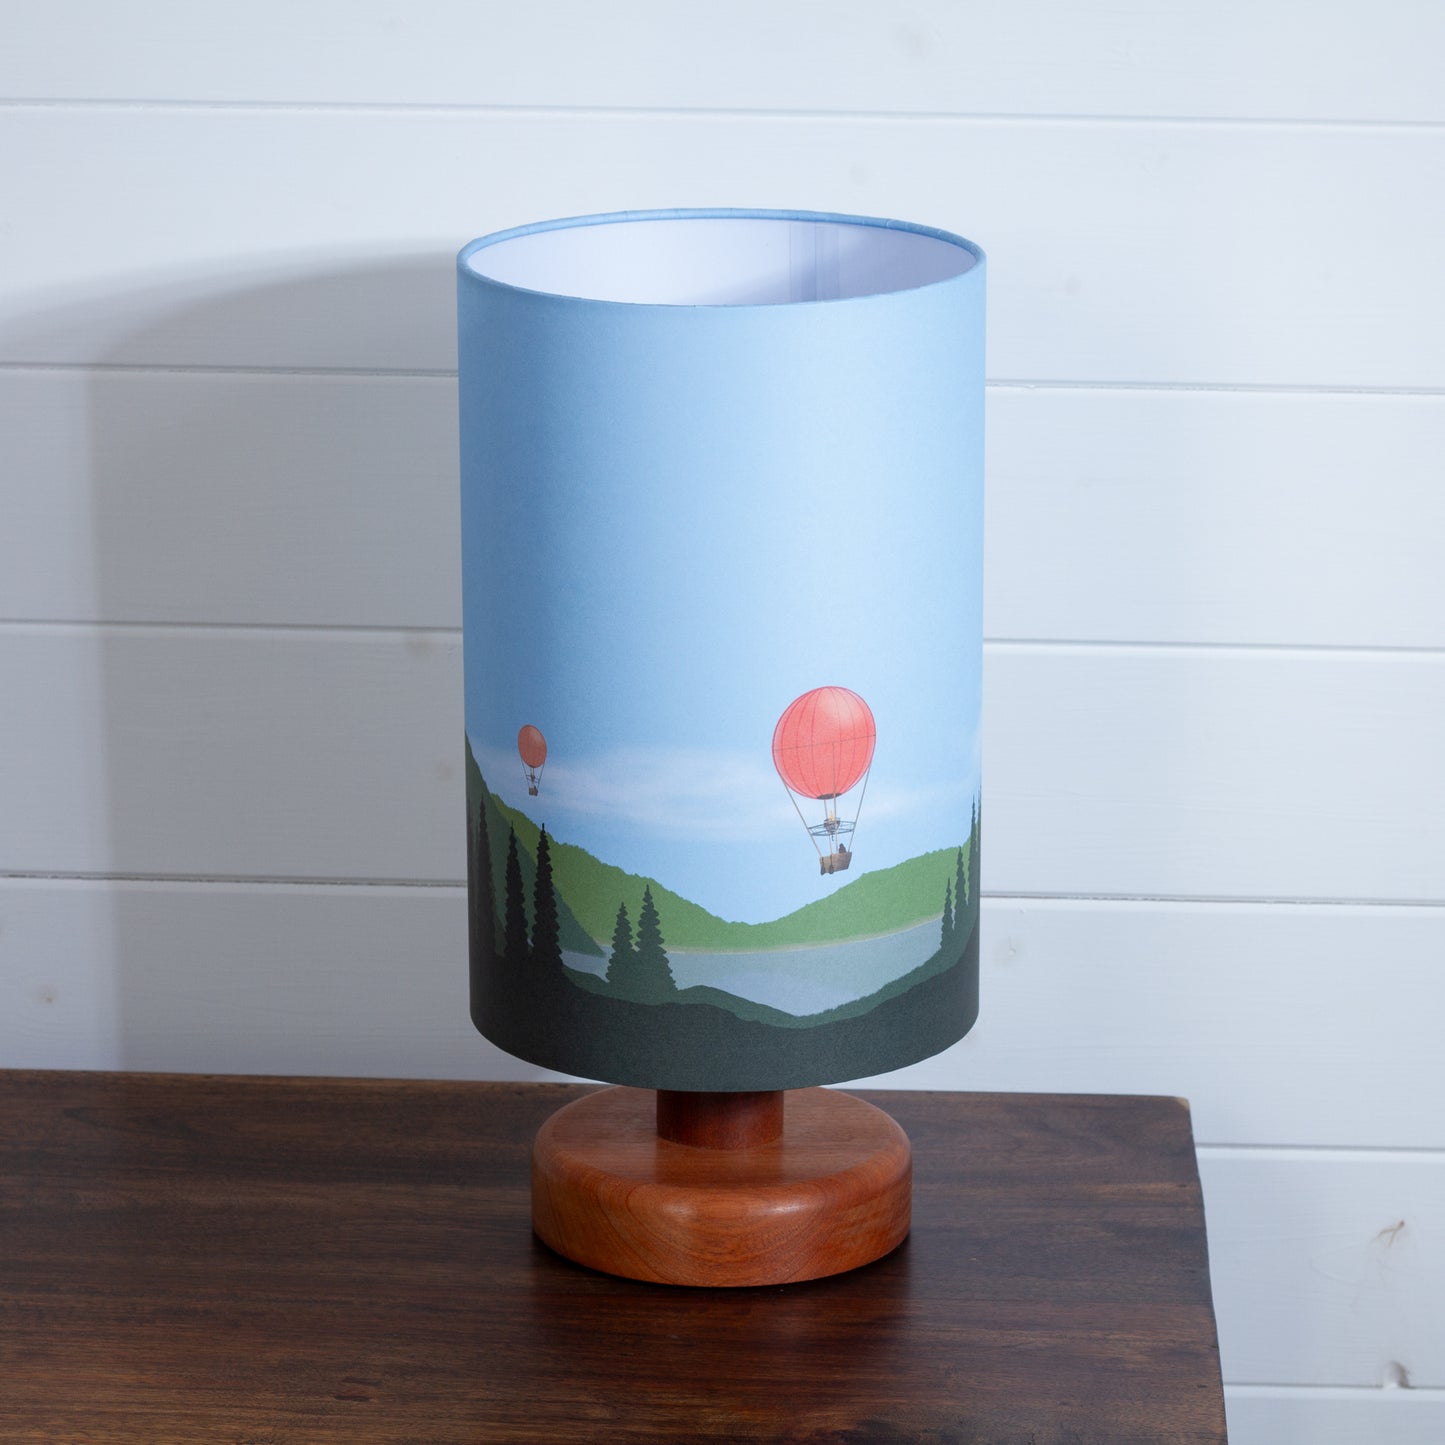 Round Sapele Table Lamp (15cm) with 20cm x 30cm Lamp Shade in Red Balloon Landscape